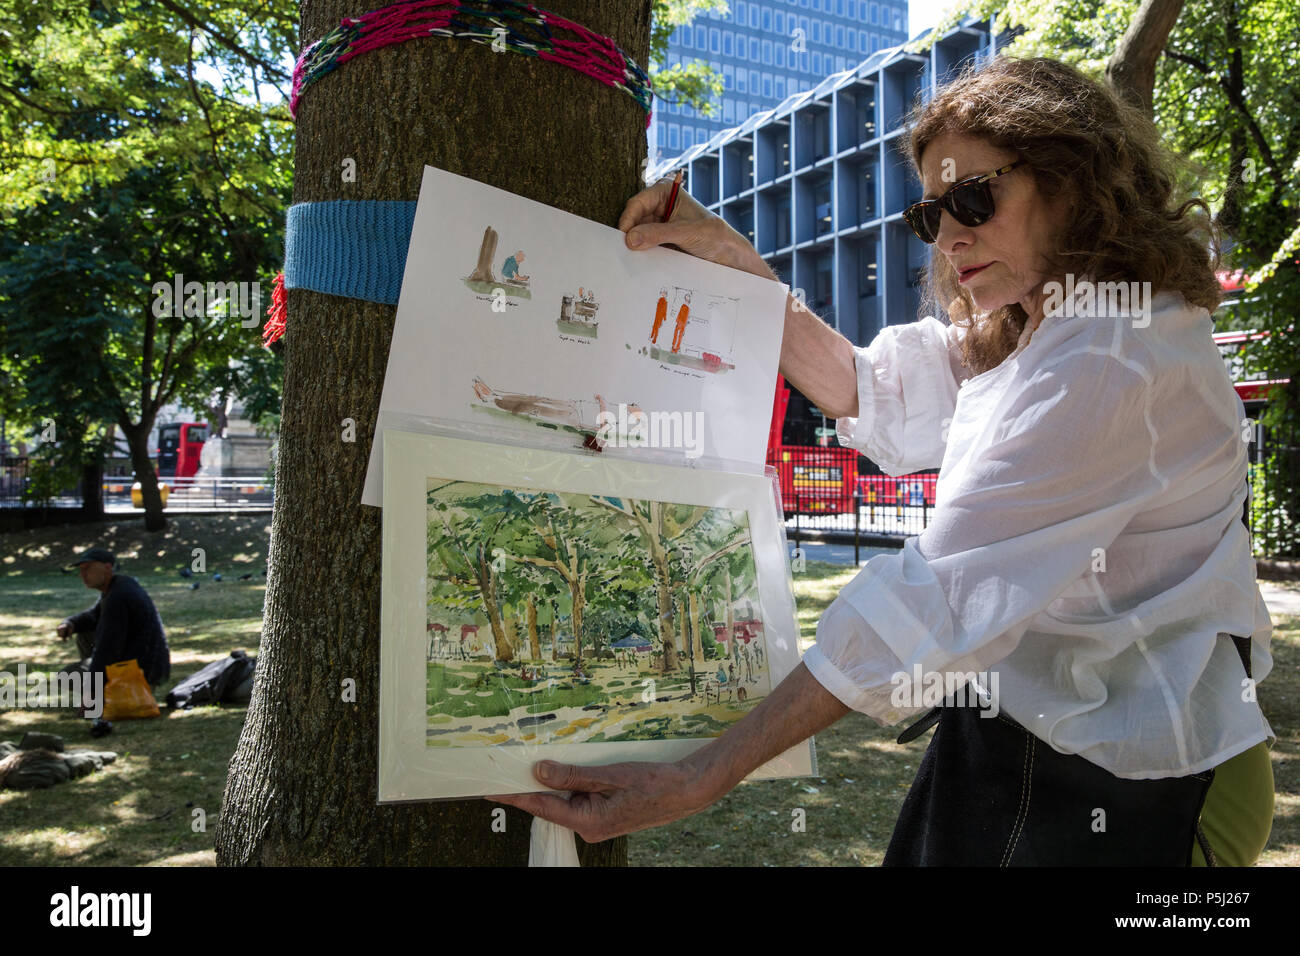 London, UK. 26th June 2018. Local resident Primavera Boman-Behram holds images of trees in Euston Square Gardens and construction workers on site as part of a protest using art against the felling of mature trees to make way for temporary sites for construction vehicles and a displaced taxi rank as part of preparations for the HS2 rail line. The protest, involving the capturing of images of the trees on paper using a variety of different techniques, was hosted by the artist Dan Llywelyn Hall as 'The Last Stand Against the Environmental Damage of HS2'. Credit: Mark Kerrison/A Stock Photo